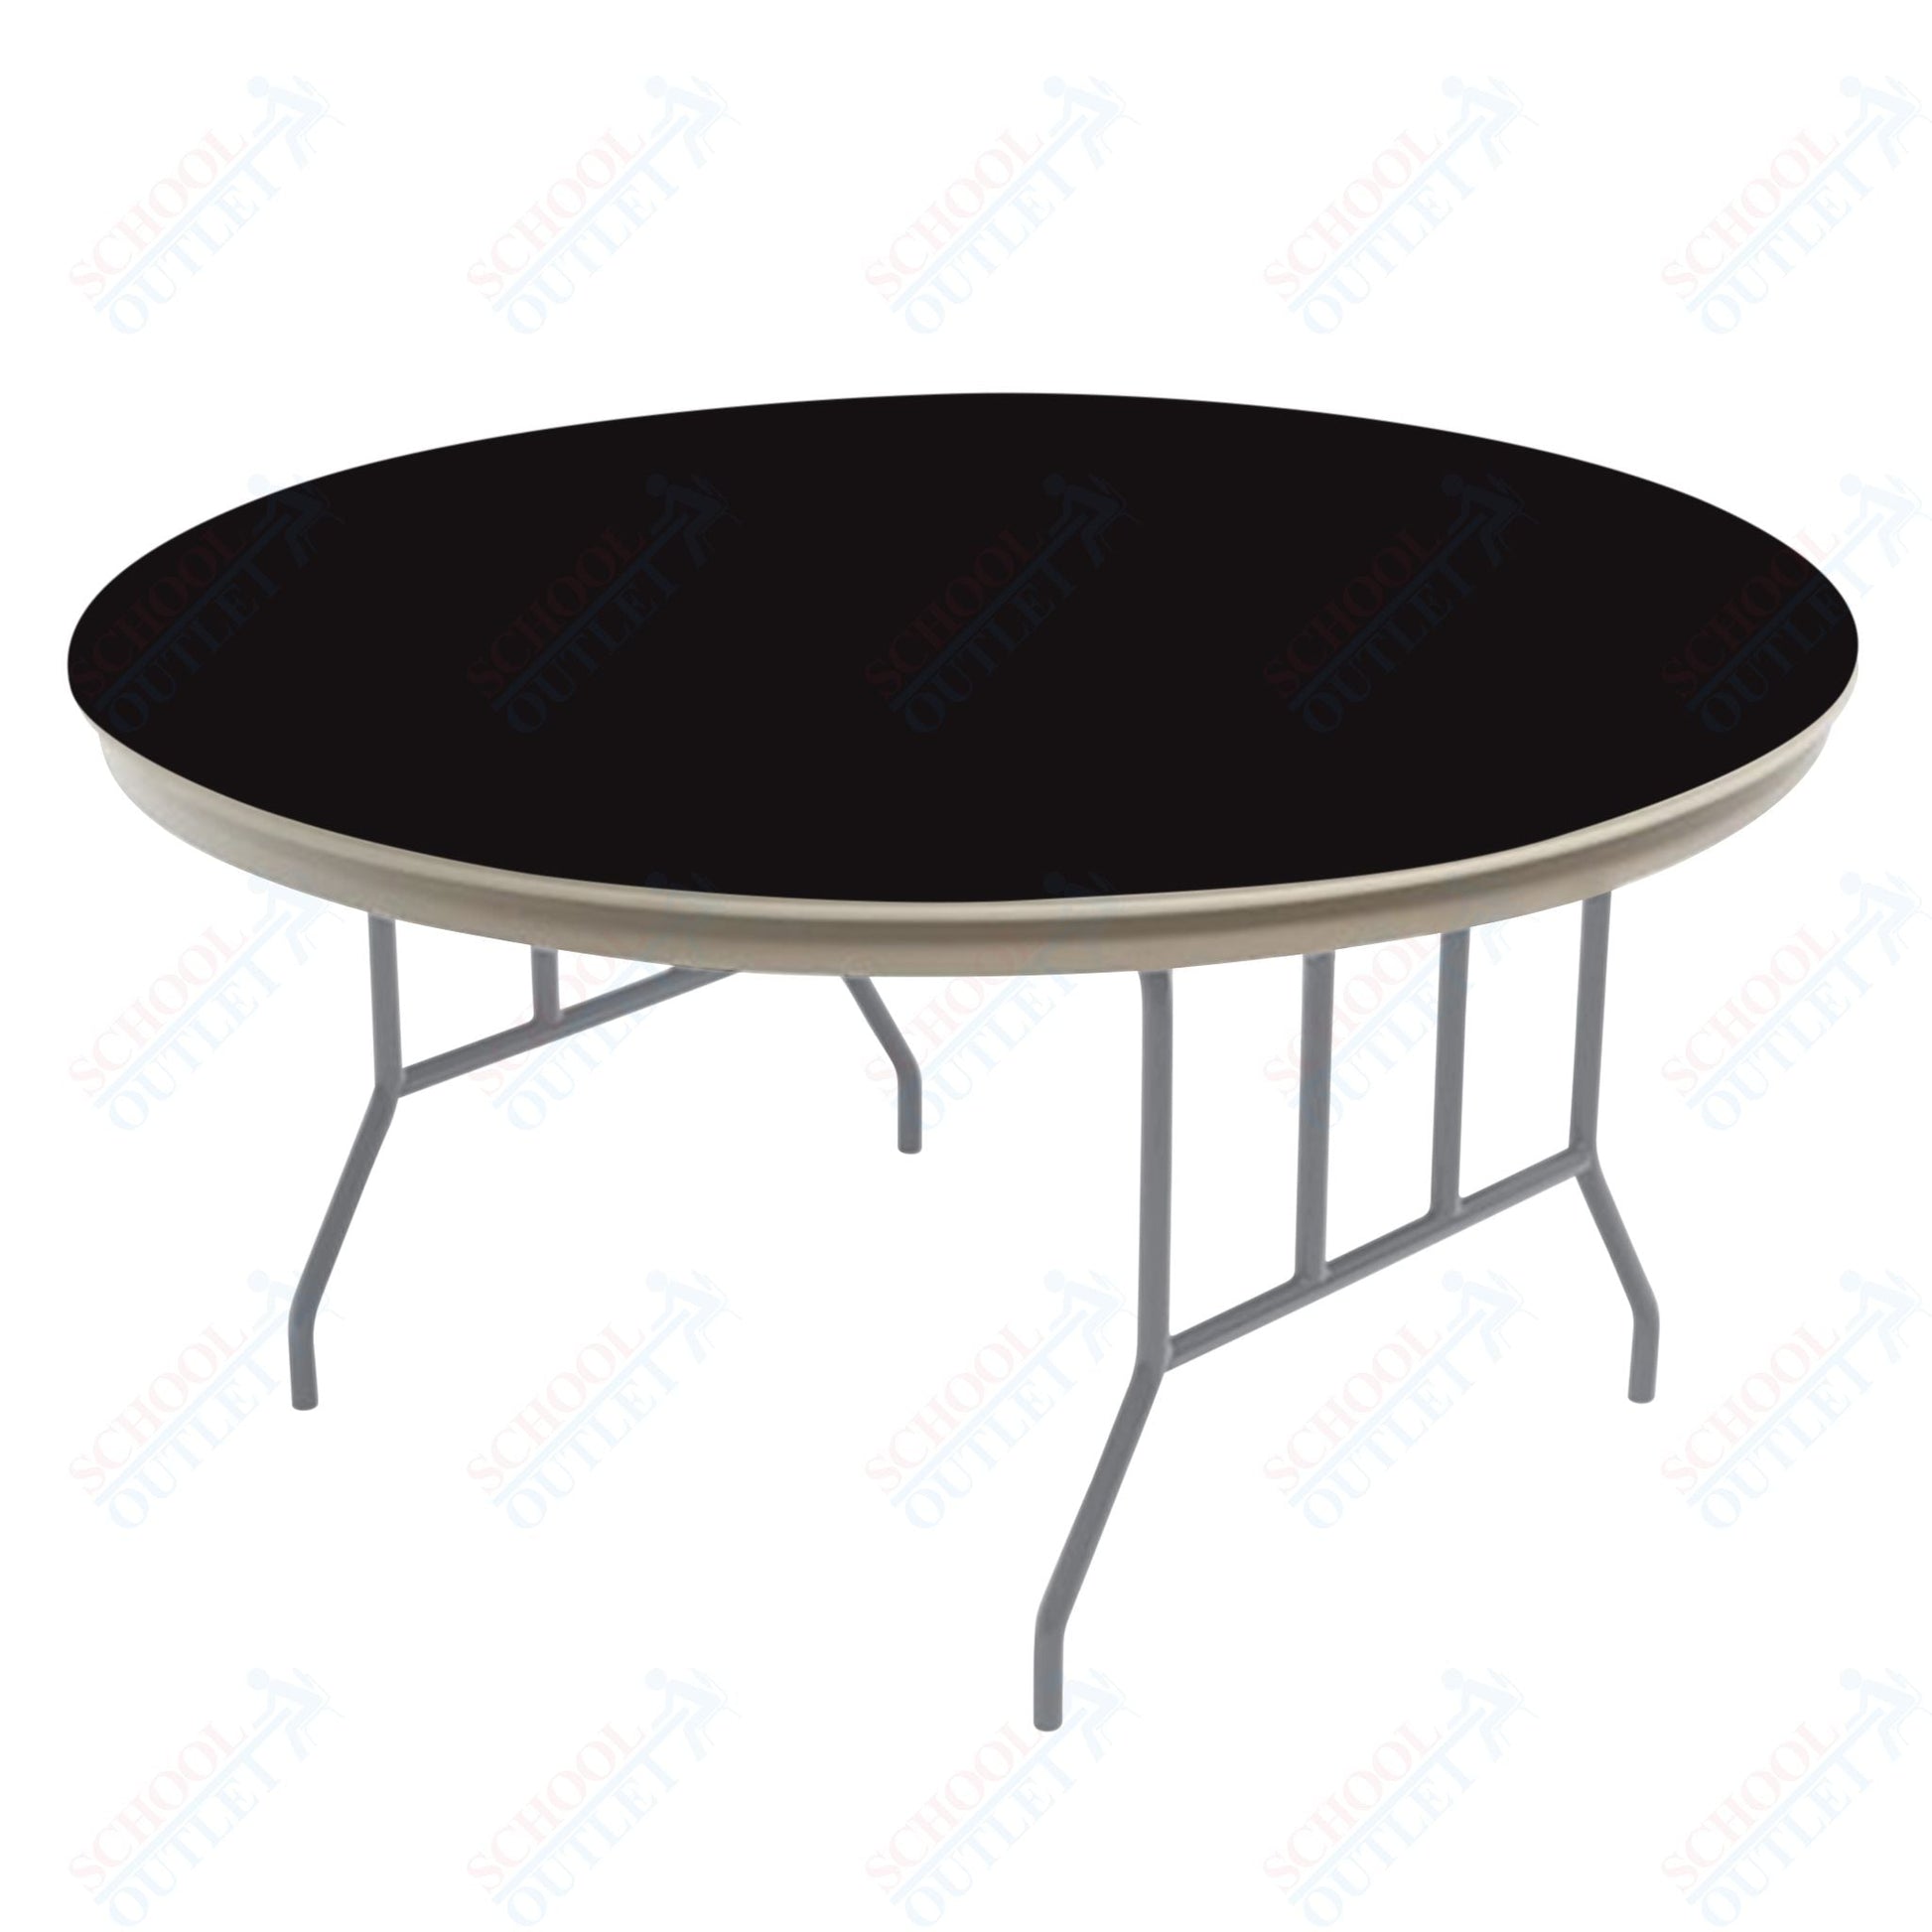 AmTab Dynalite Featherweight Heavy - Duty ABS Plastic Folding Table - Round - 42" Diameter x 29"H (AmTab AMT - R42DL) - SchoolOutlet